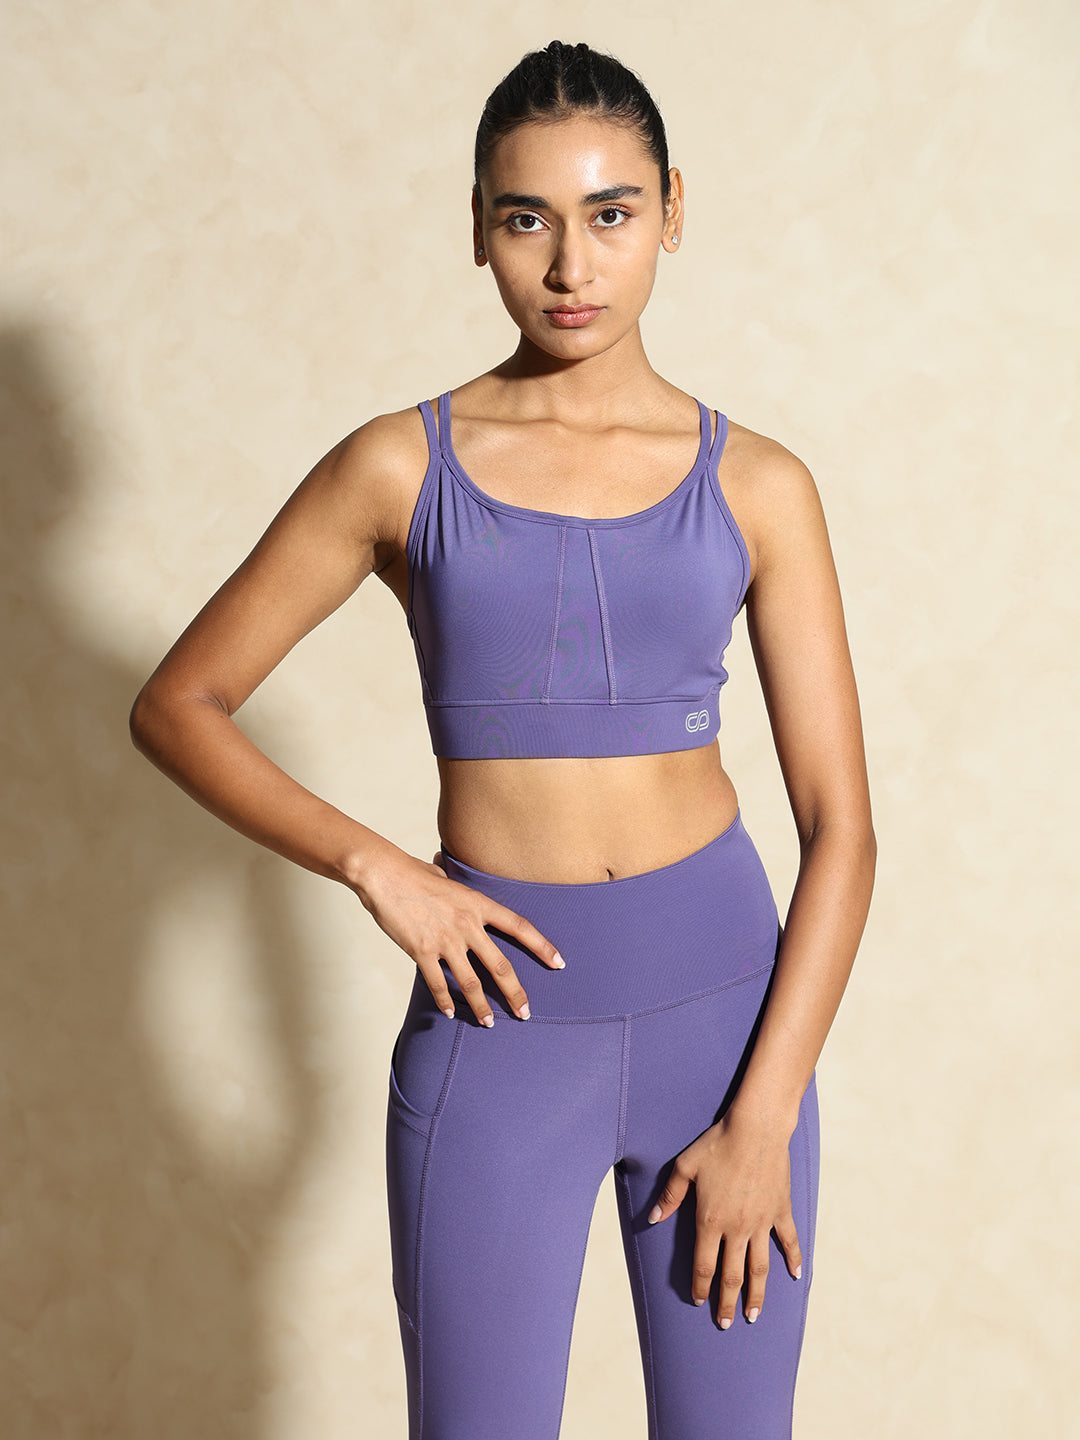 X-Strap Sports Bra in Iris color by Chandra Yoga & Active Wear